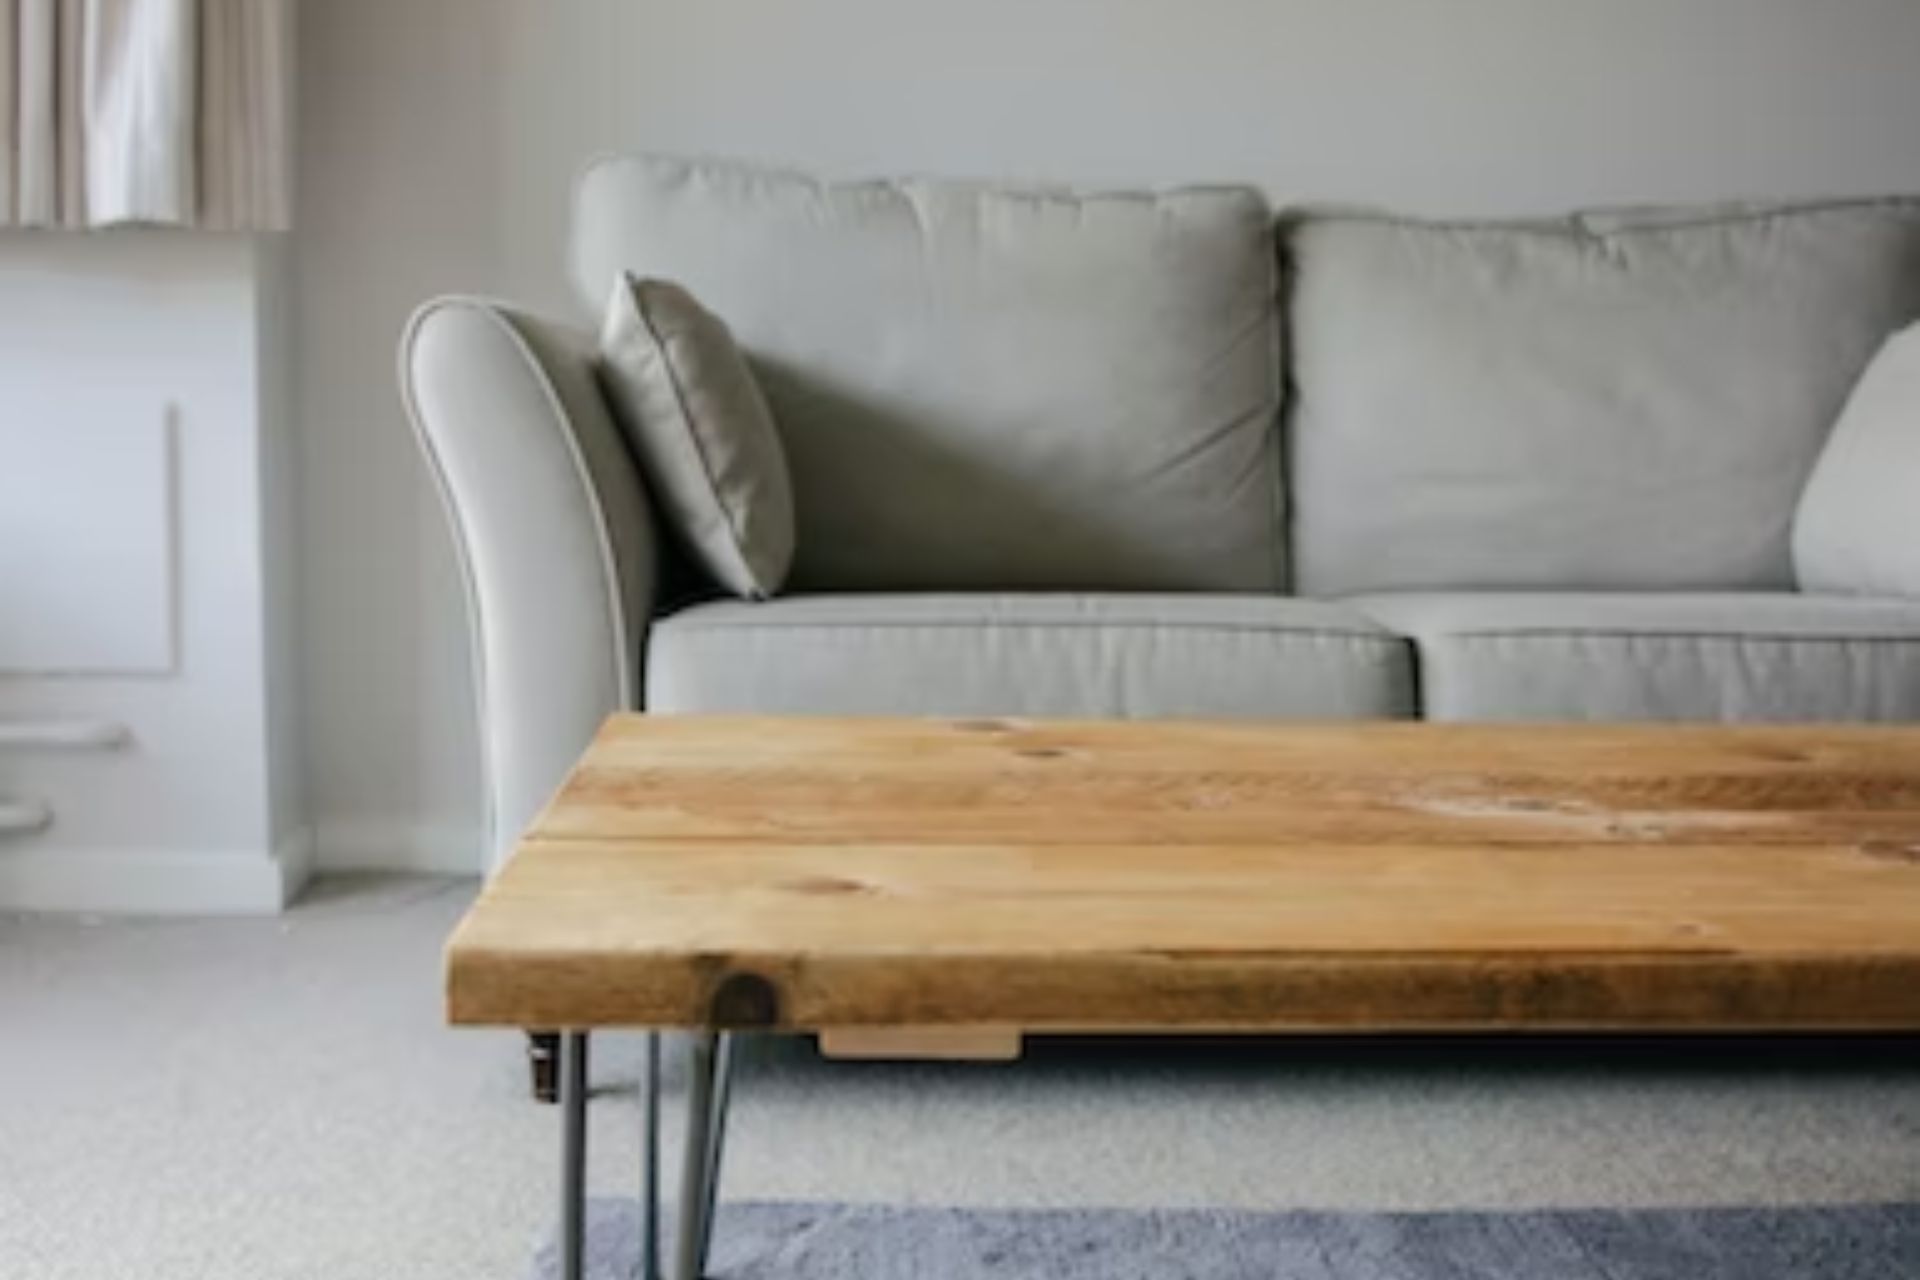 Knwoing where to sell used furniture, like this wood coffee table and gray couch, can help you make money.